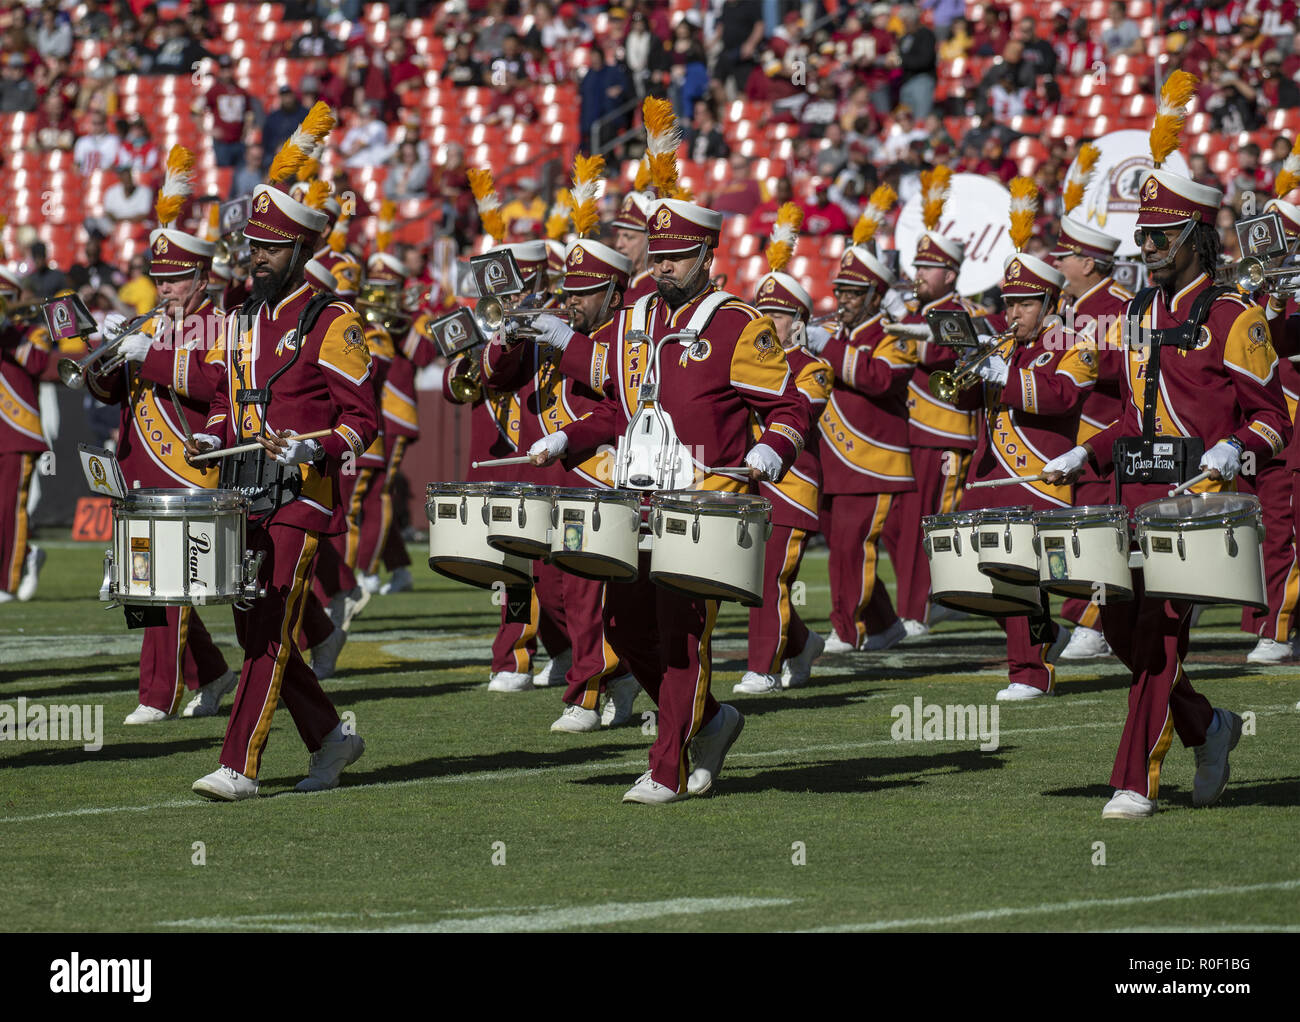 Landover, Maryland, USA. 4th Nov, 2018. Washington Redskins Marching Band performs prior to the game against the Atlanta Falcons at FedEx Field in Landover, Maryland on Sunday, November 4, 2018 Credit: Ron Sachs/CNP/ZUMA Wire/Alamy Live News Stock Photo